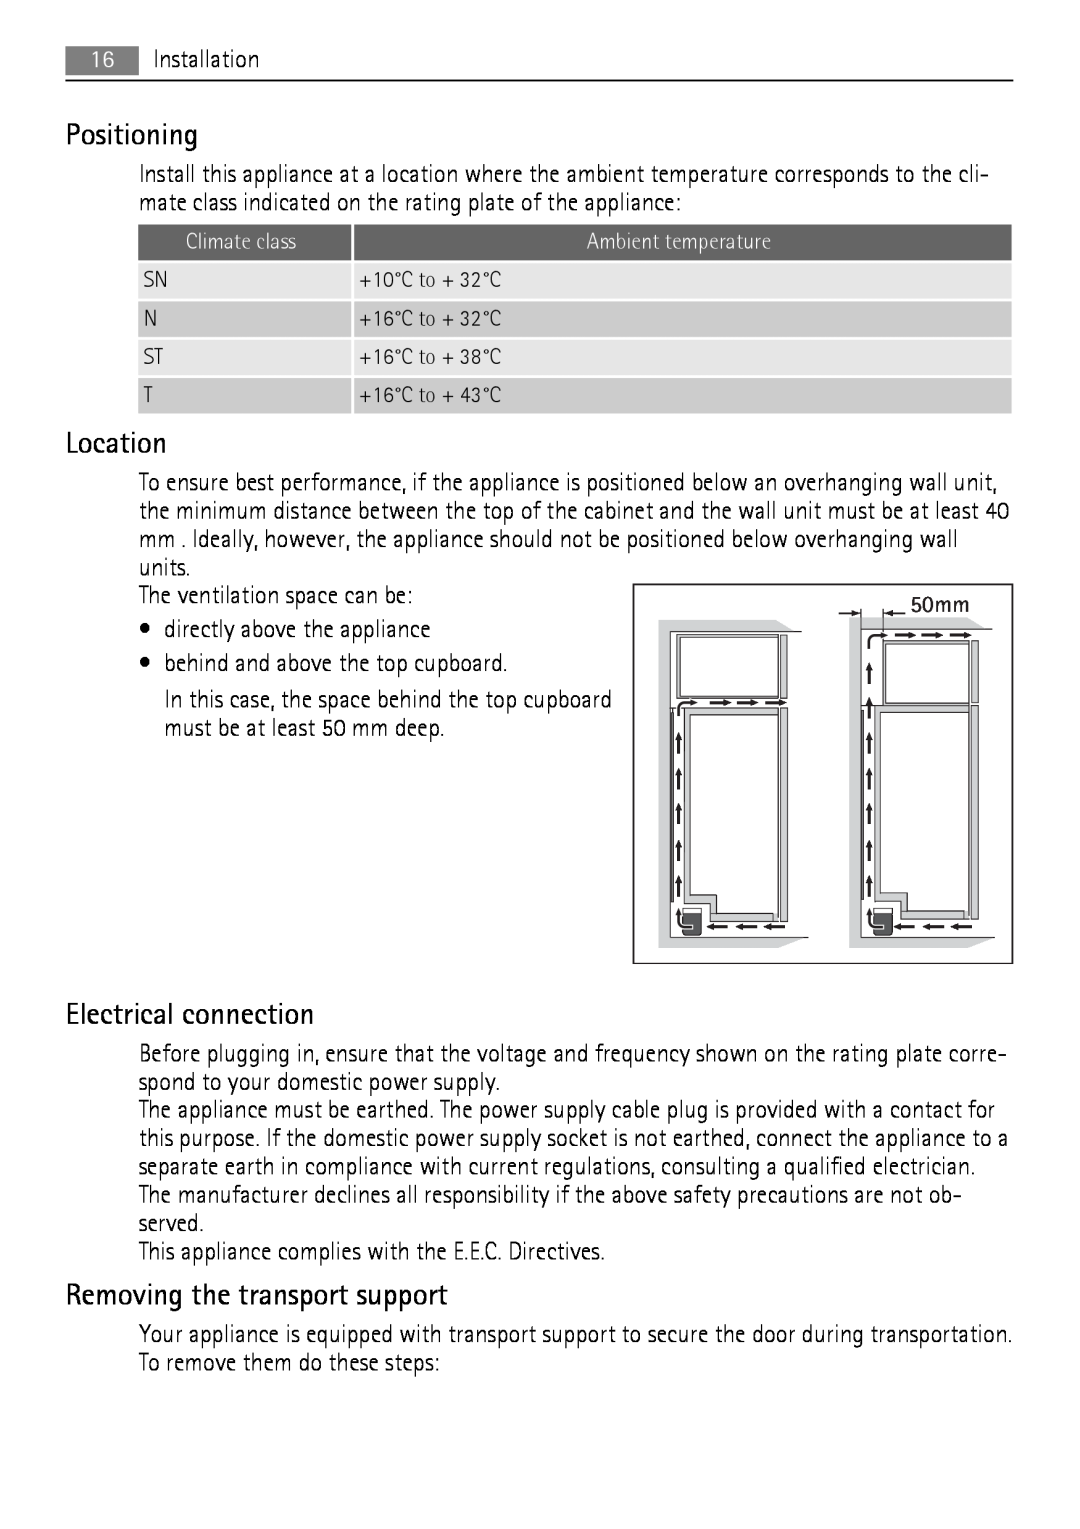 AEG AGN2901, AGN2451 user manual Positioning, Location, Electrical connection, Removing the transport support 